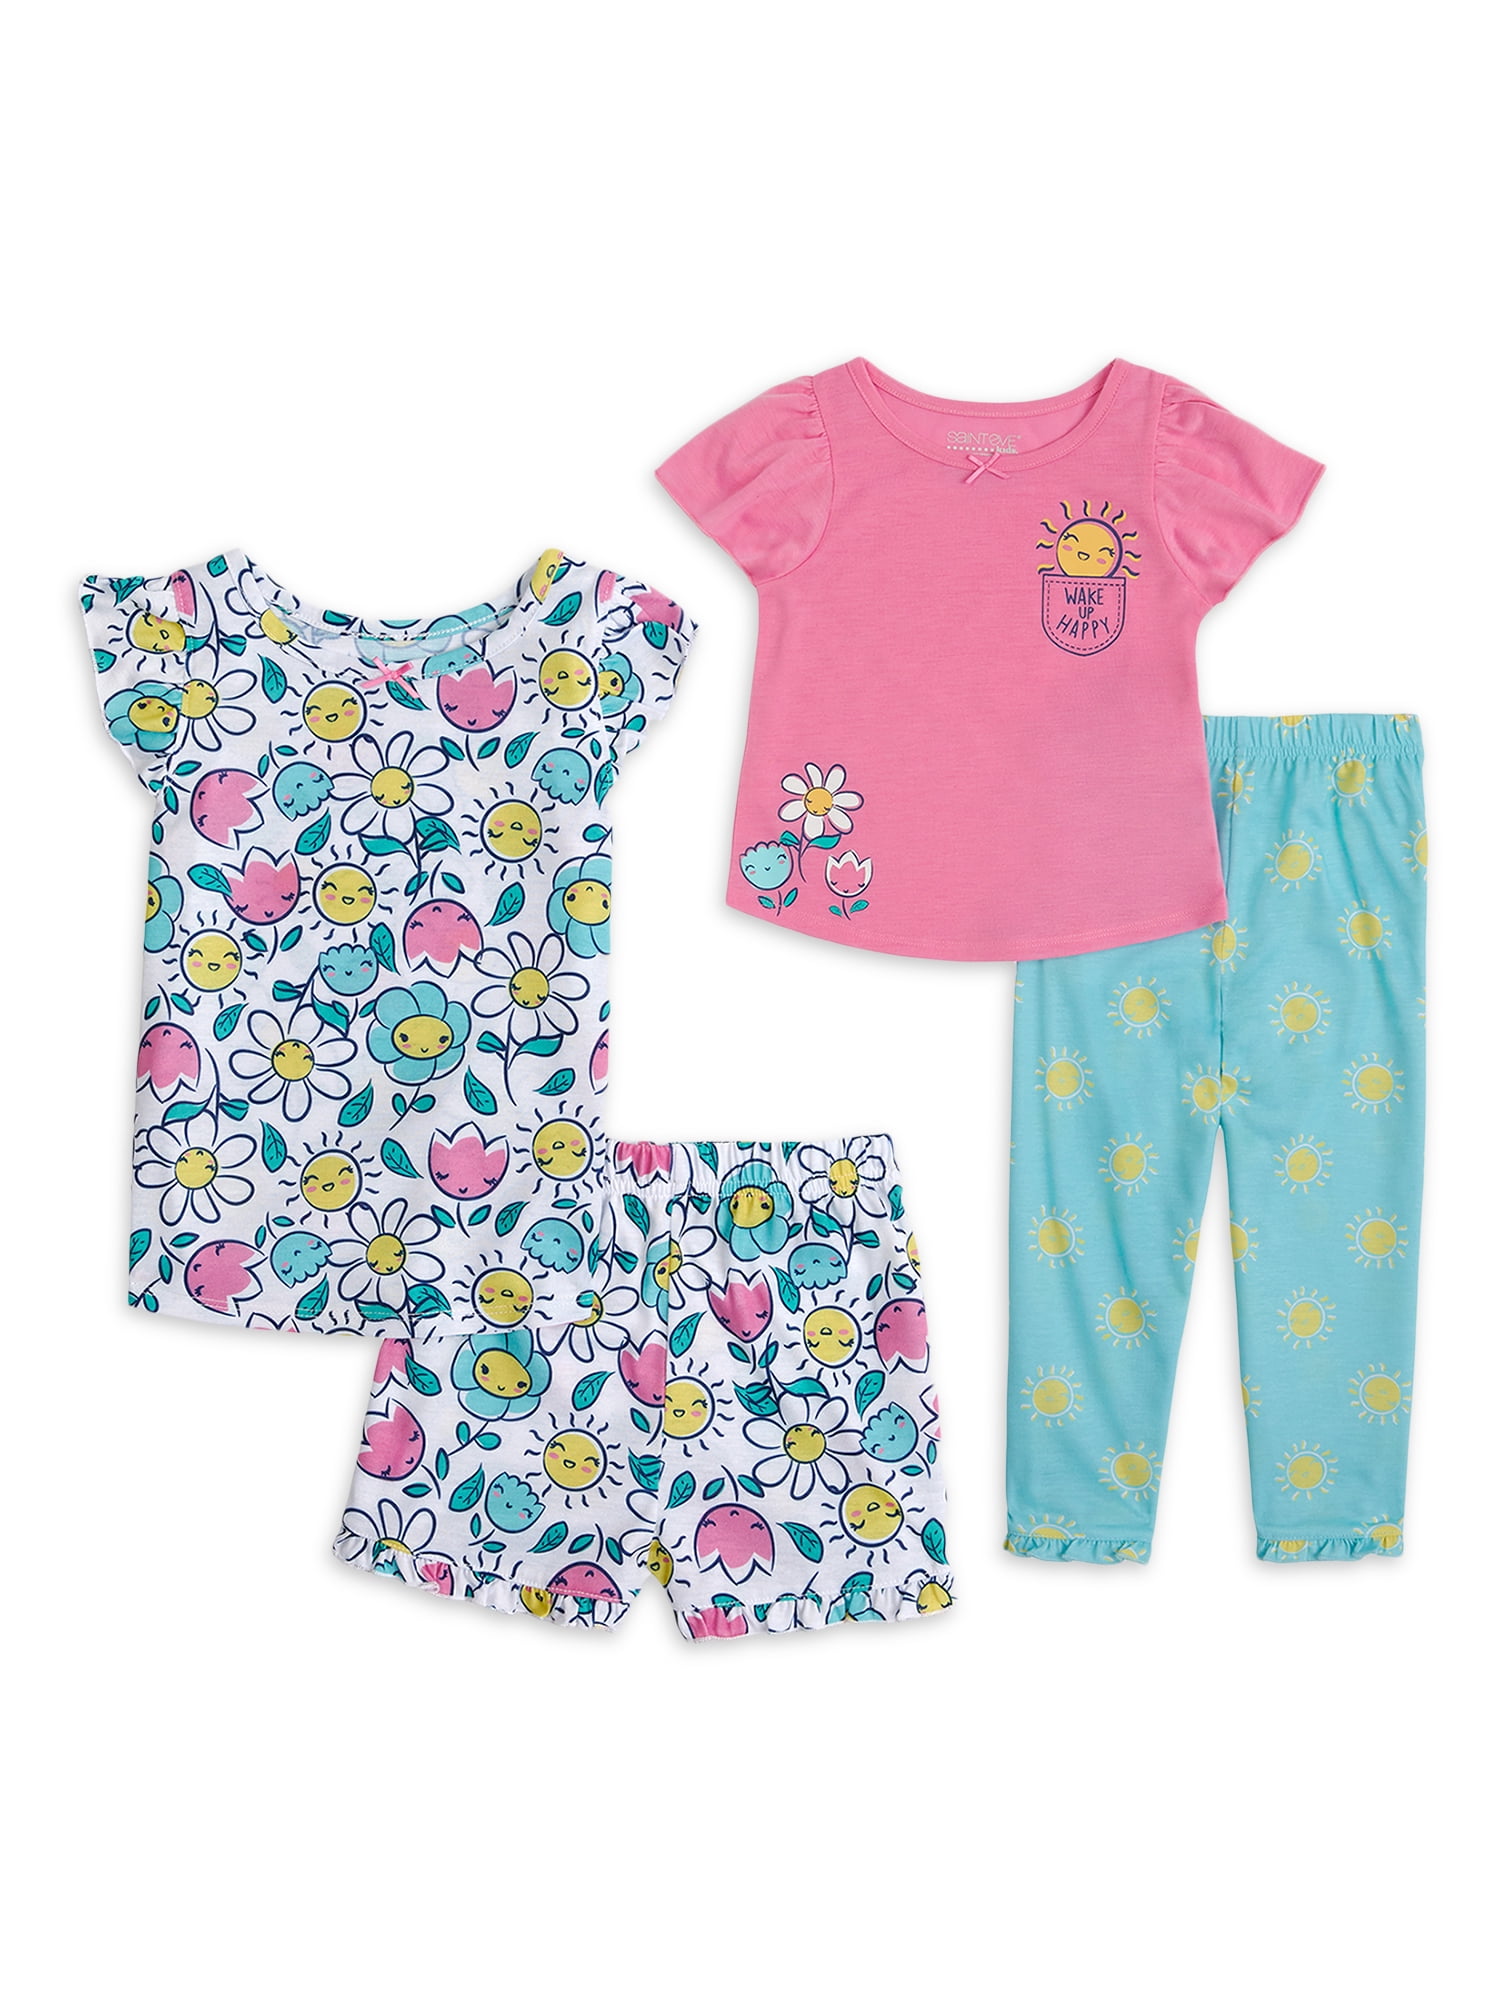 BNWT Hatley Infant Baby Girls 2 Piece Outfit Flower Horses Top & Leggings Set 